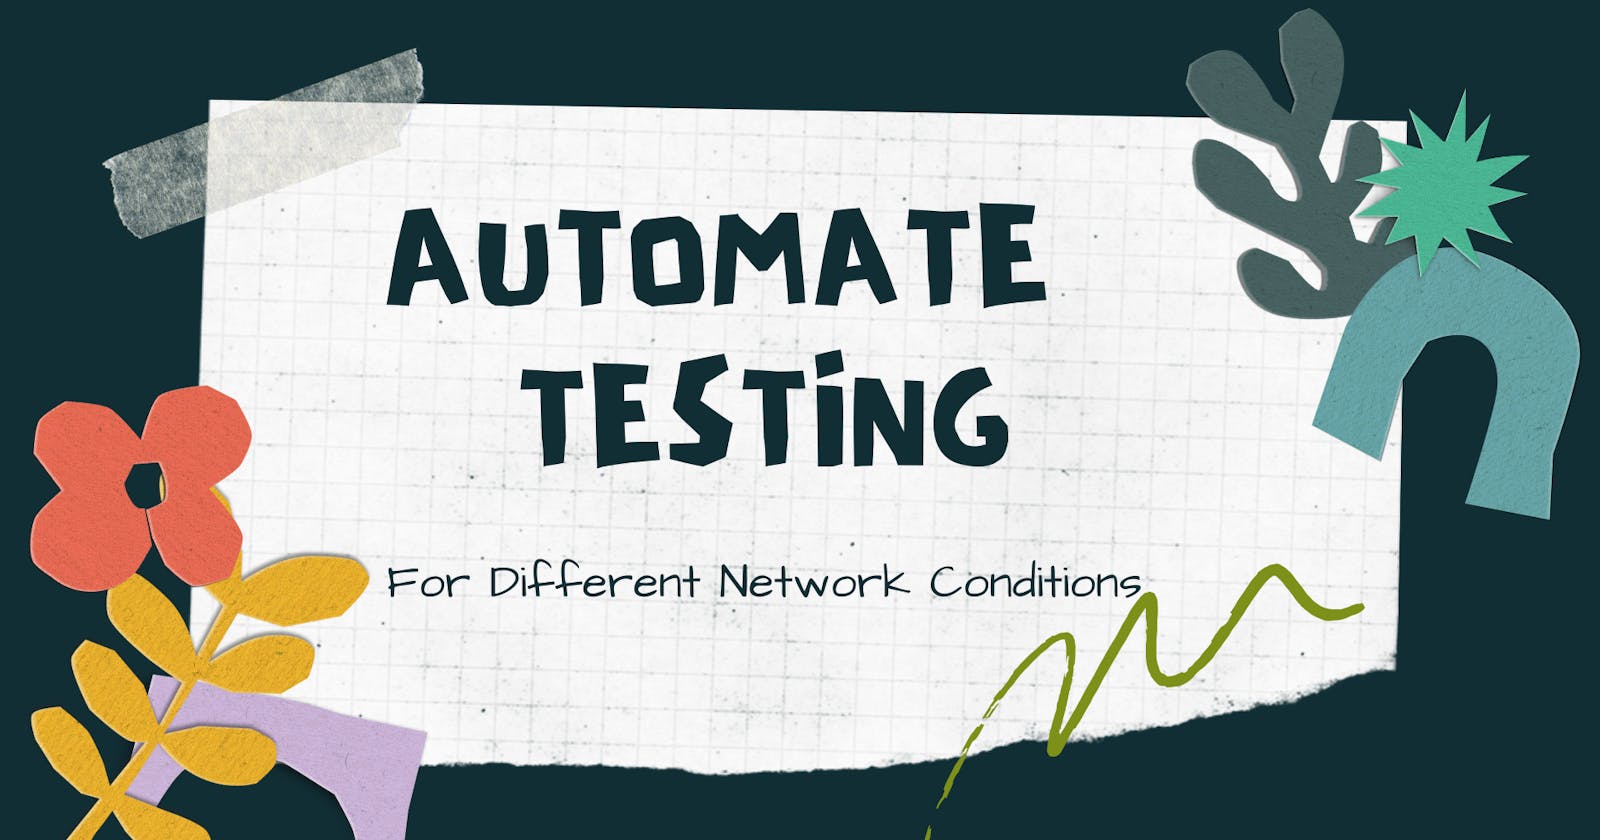 Automate Application Testing for different Network Conditions